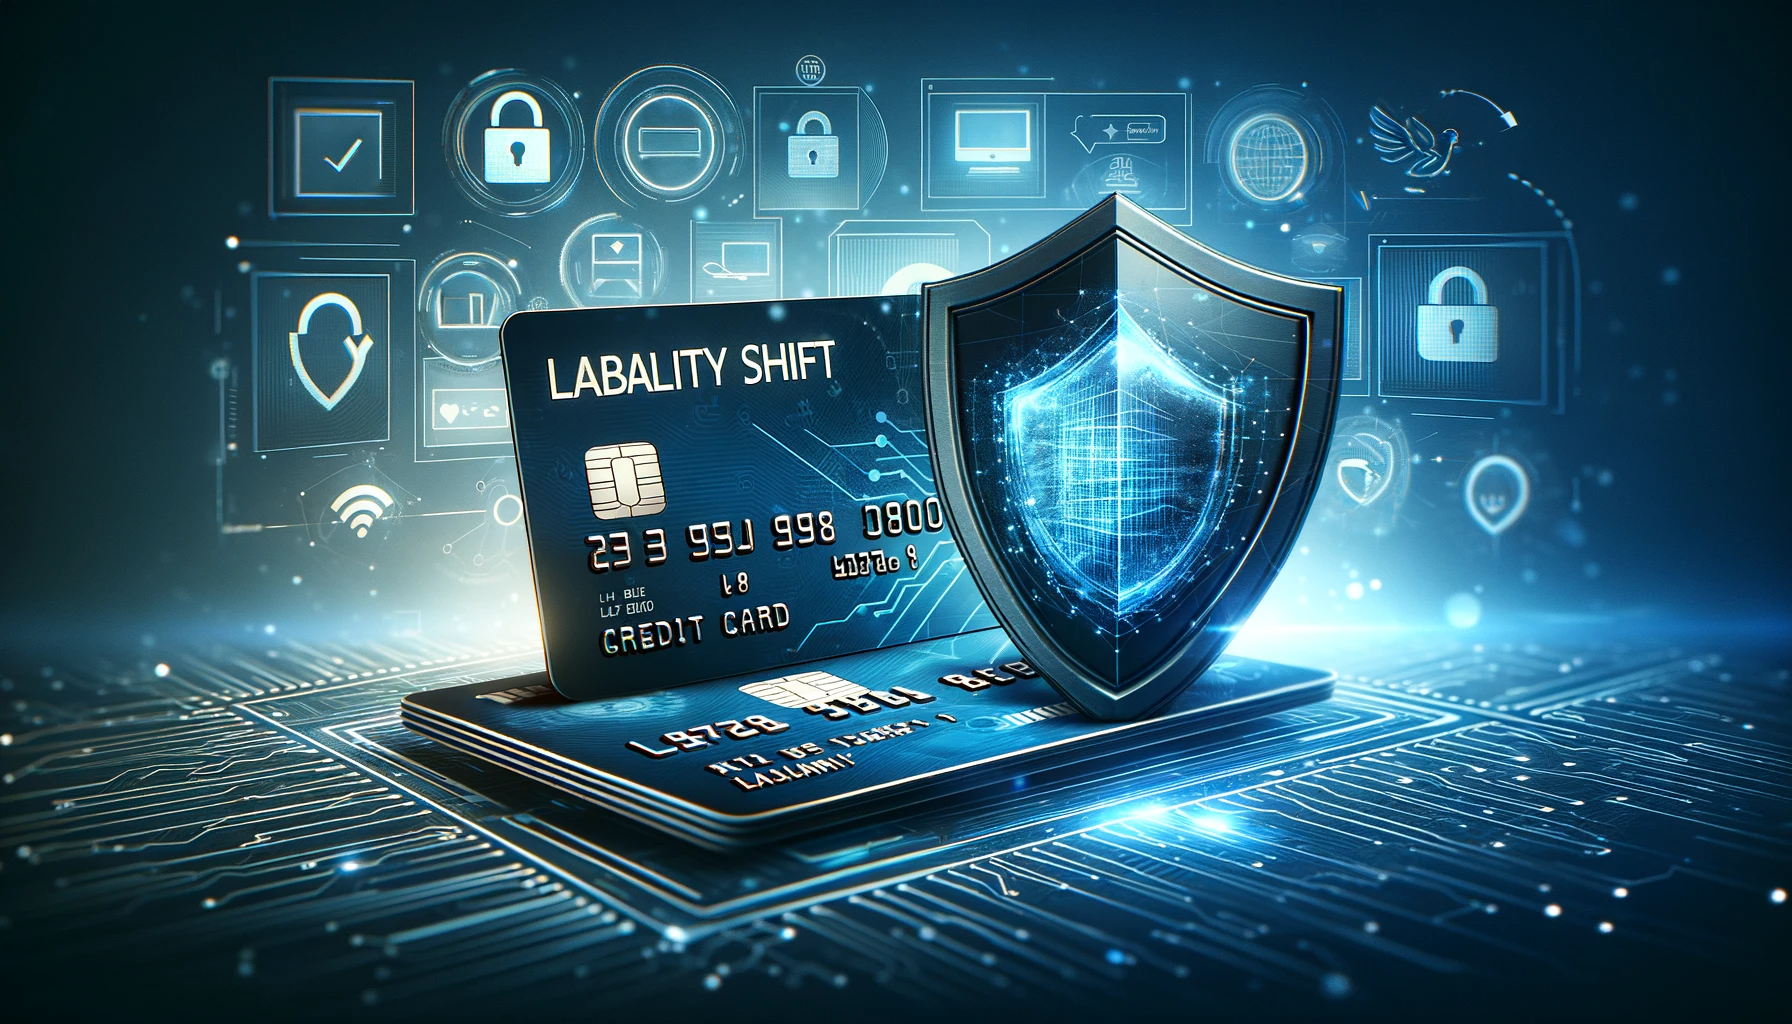 Liability shift in payment processing